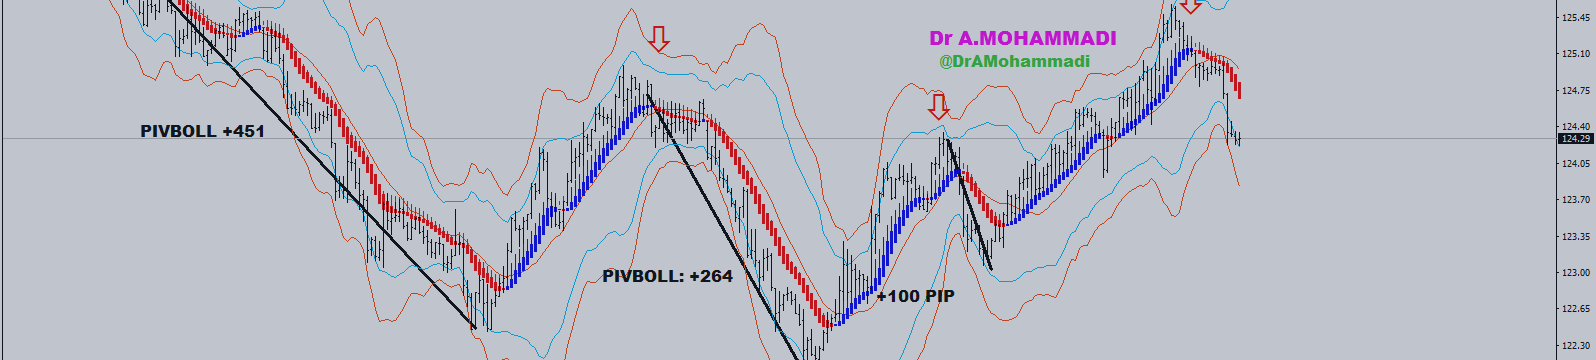 Results of PIVBOLL Entry in EURJPY : 3 Positon